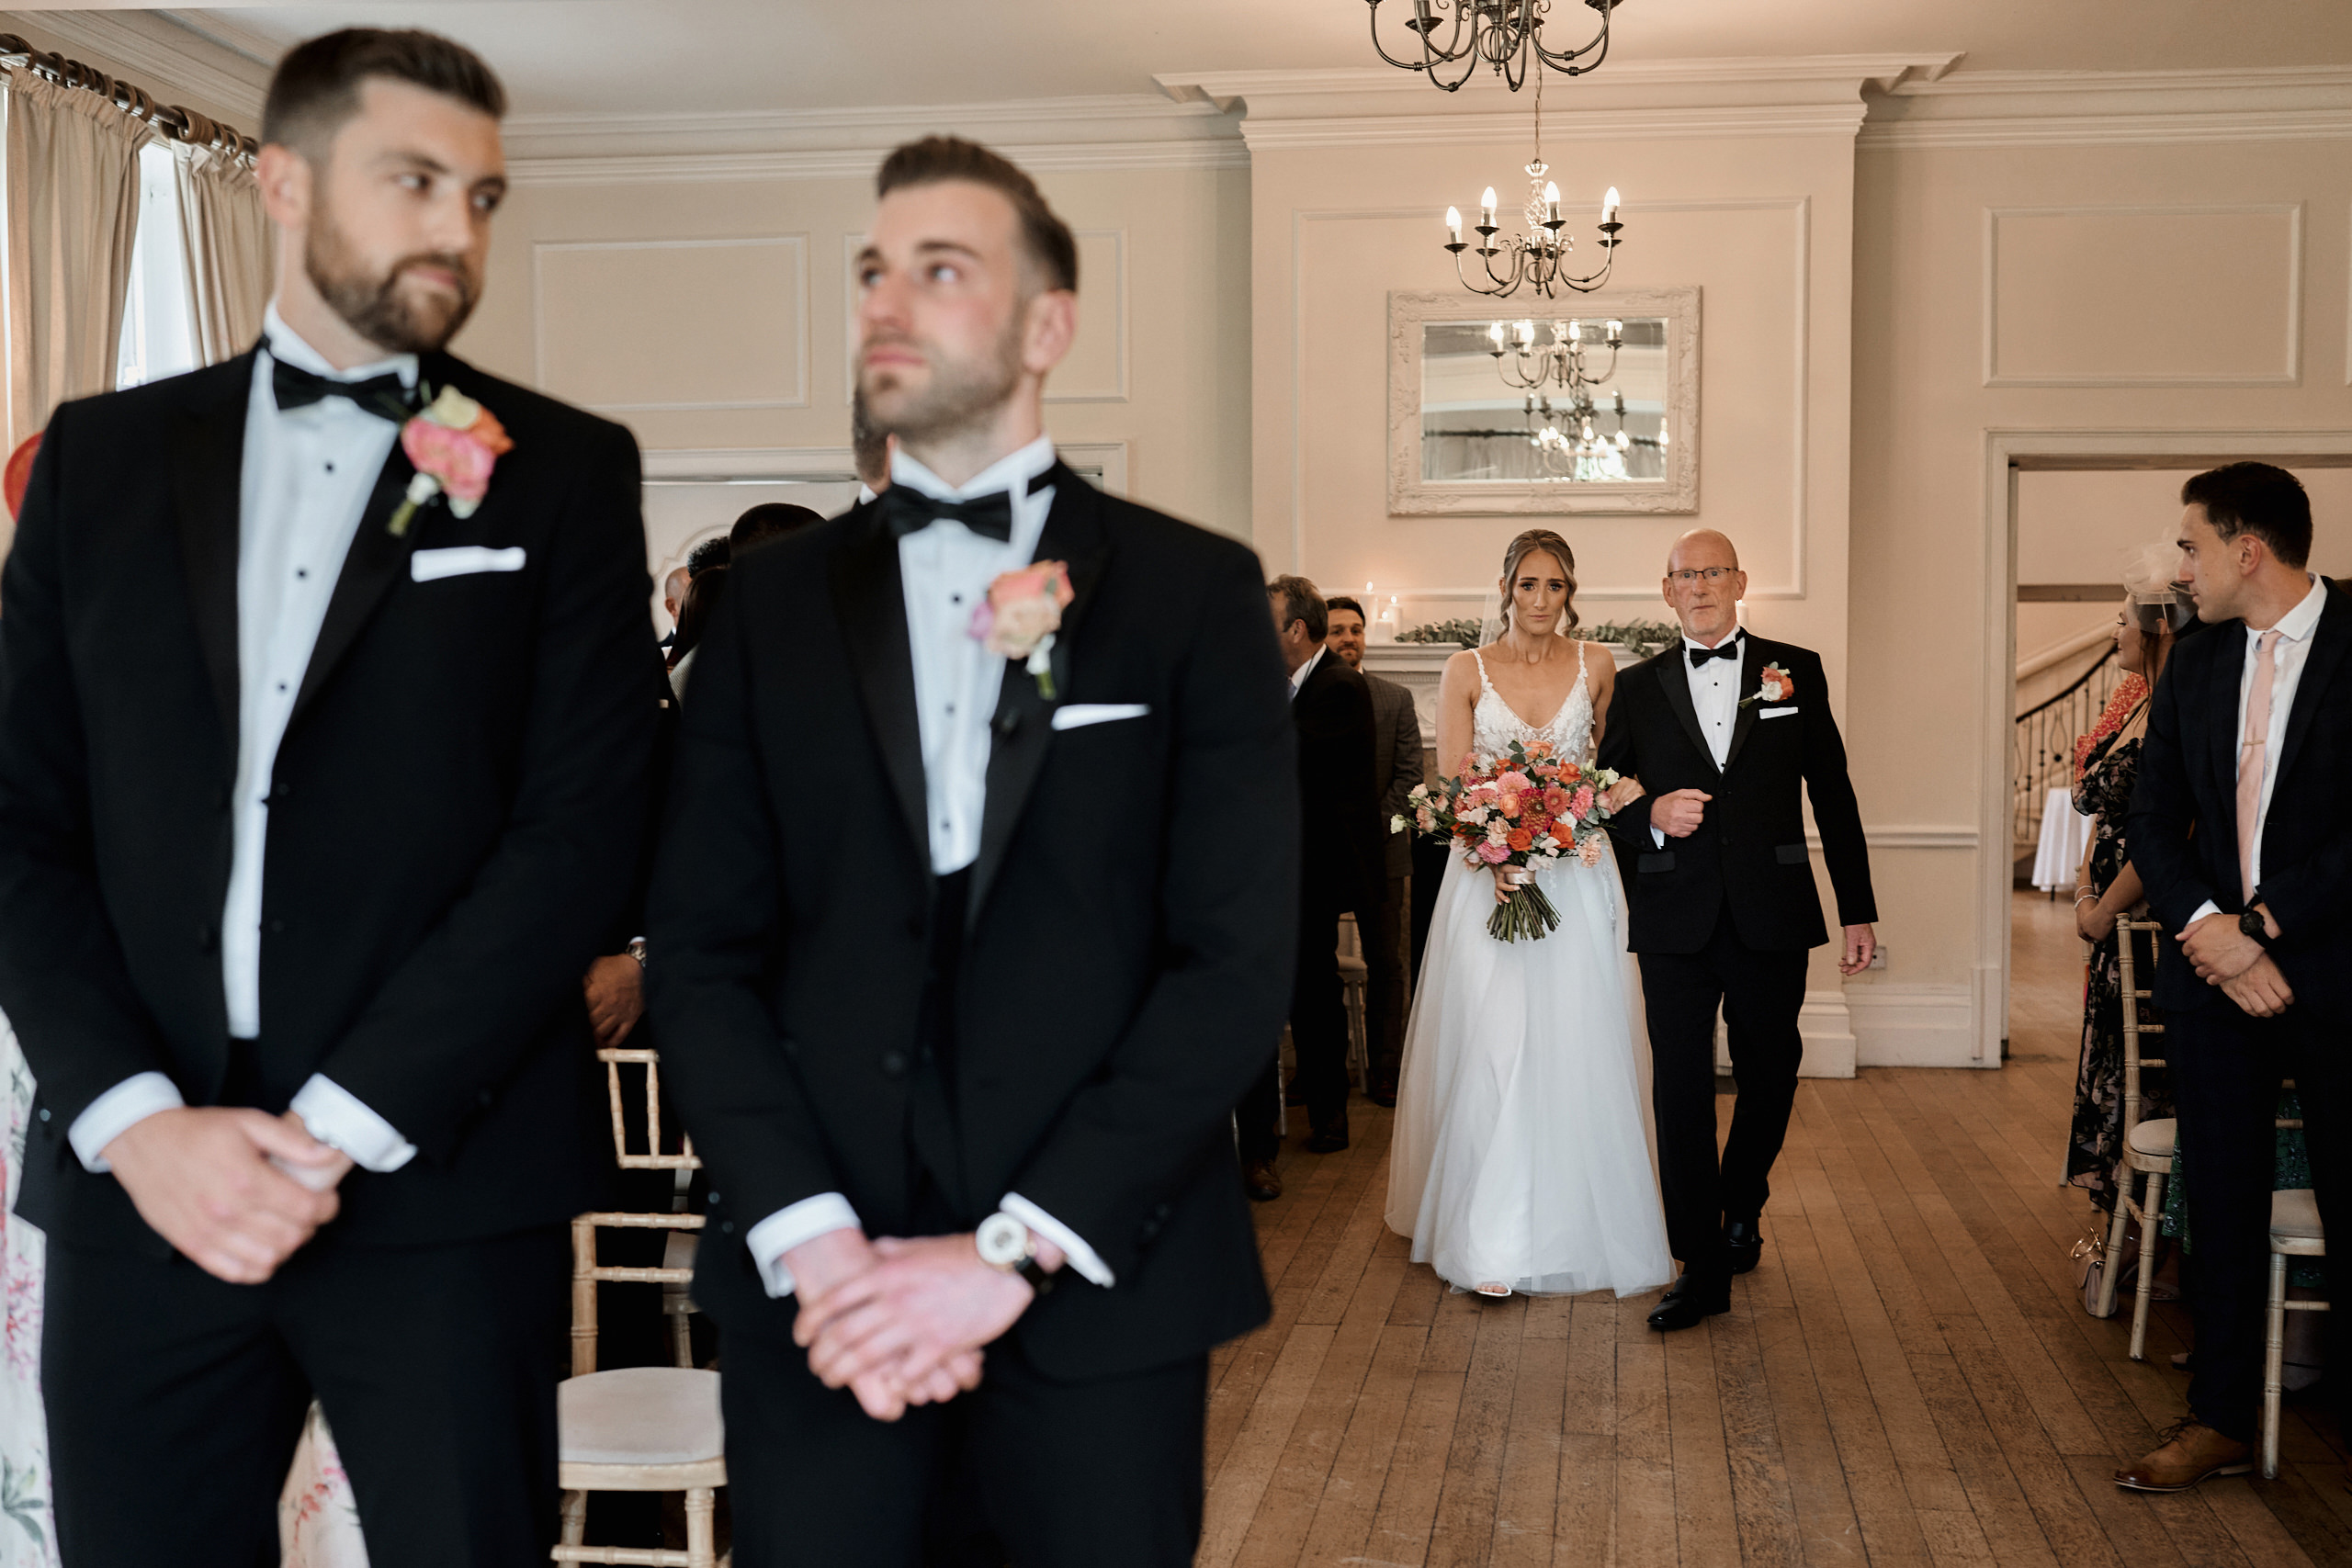 A bride and groom walking down the aisle in tuxedos.